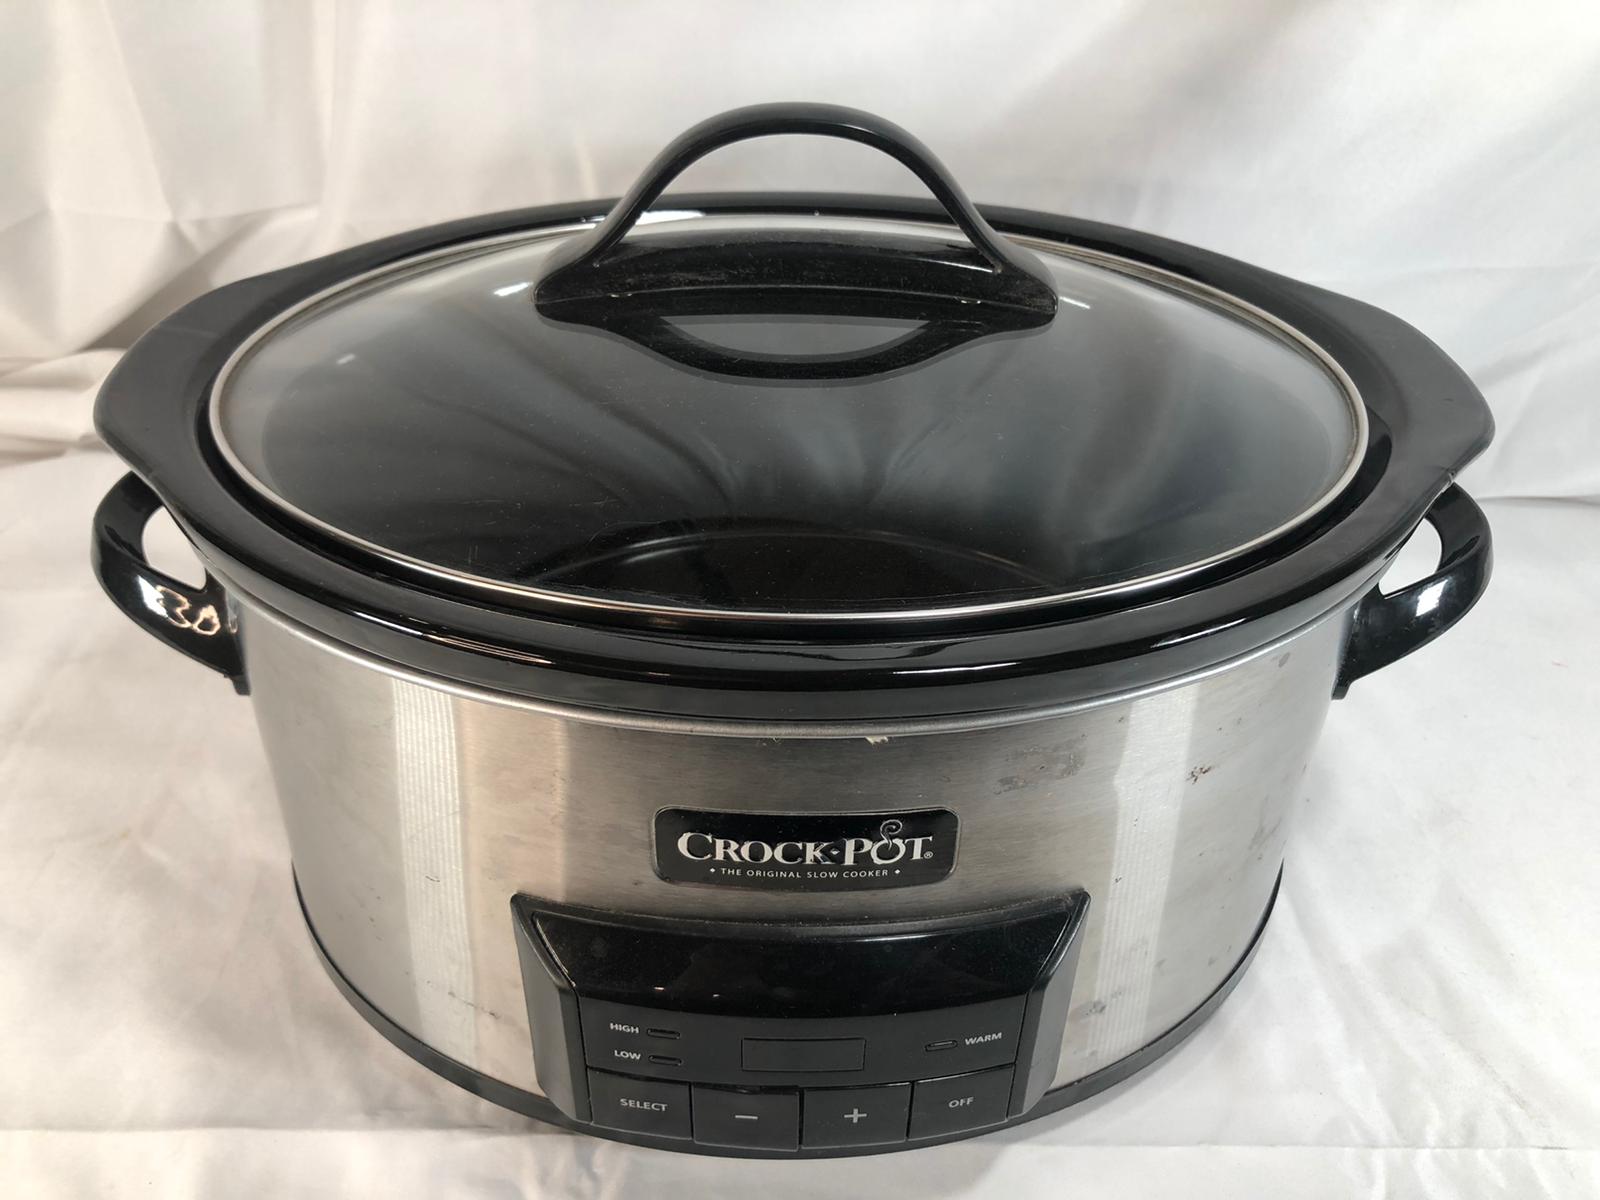 6qt Stainless Steel Digital Countdown Slow Cooker - As Is, Used, No Box